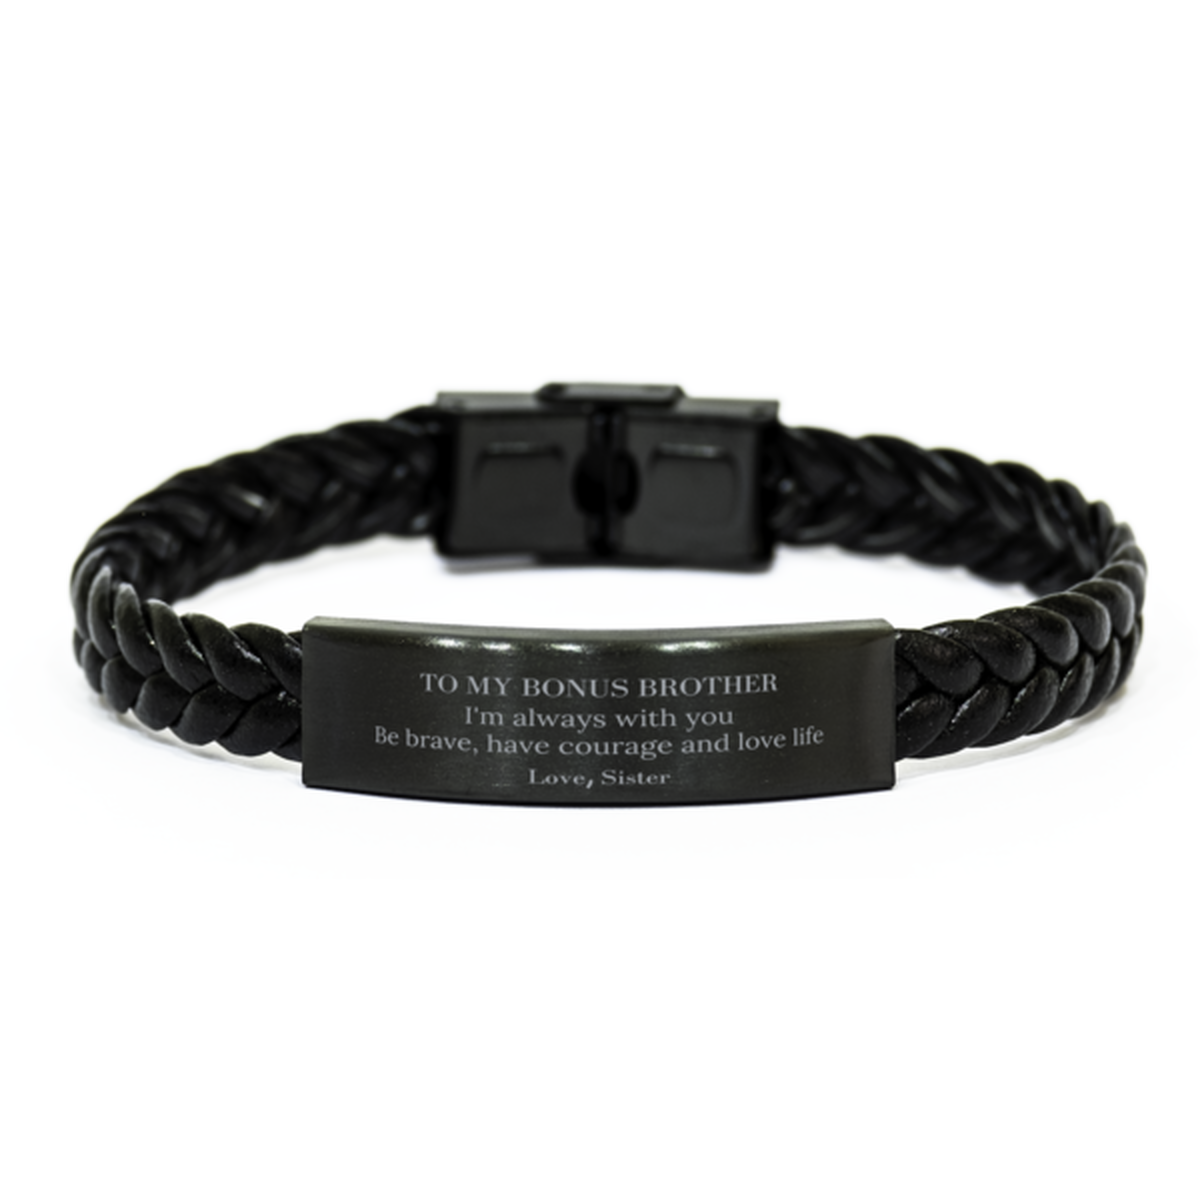 To My Bonus Brother Gifts from Sister, Unique Braided Leather Bracelet Inspirational Christmas Birthday Graduation Gifts for Bonus Brother I'm always with you. Be brave, have courage and love life. Love, Sister